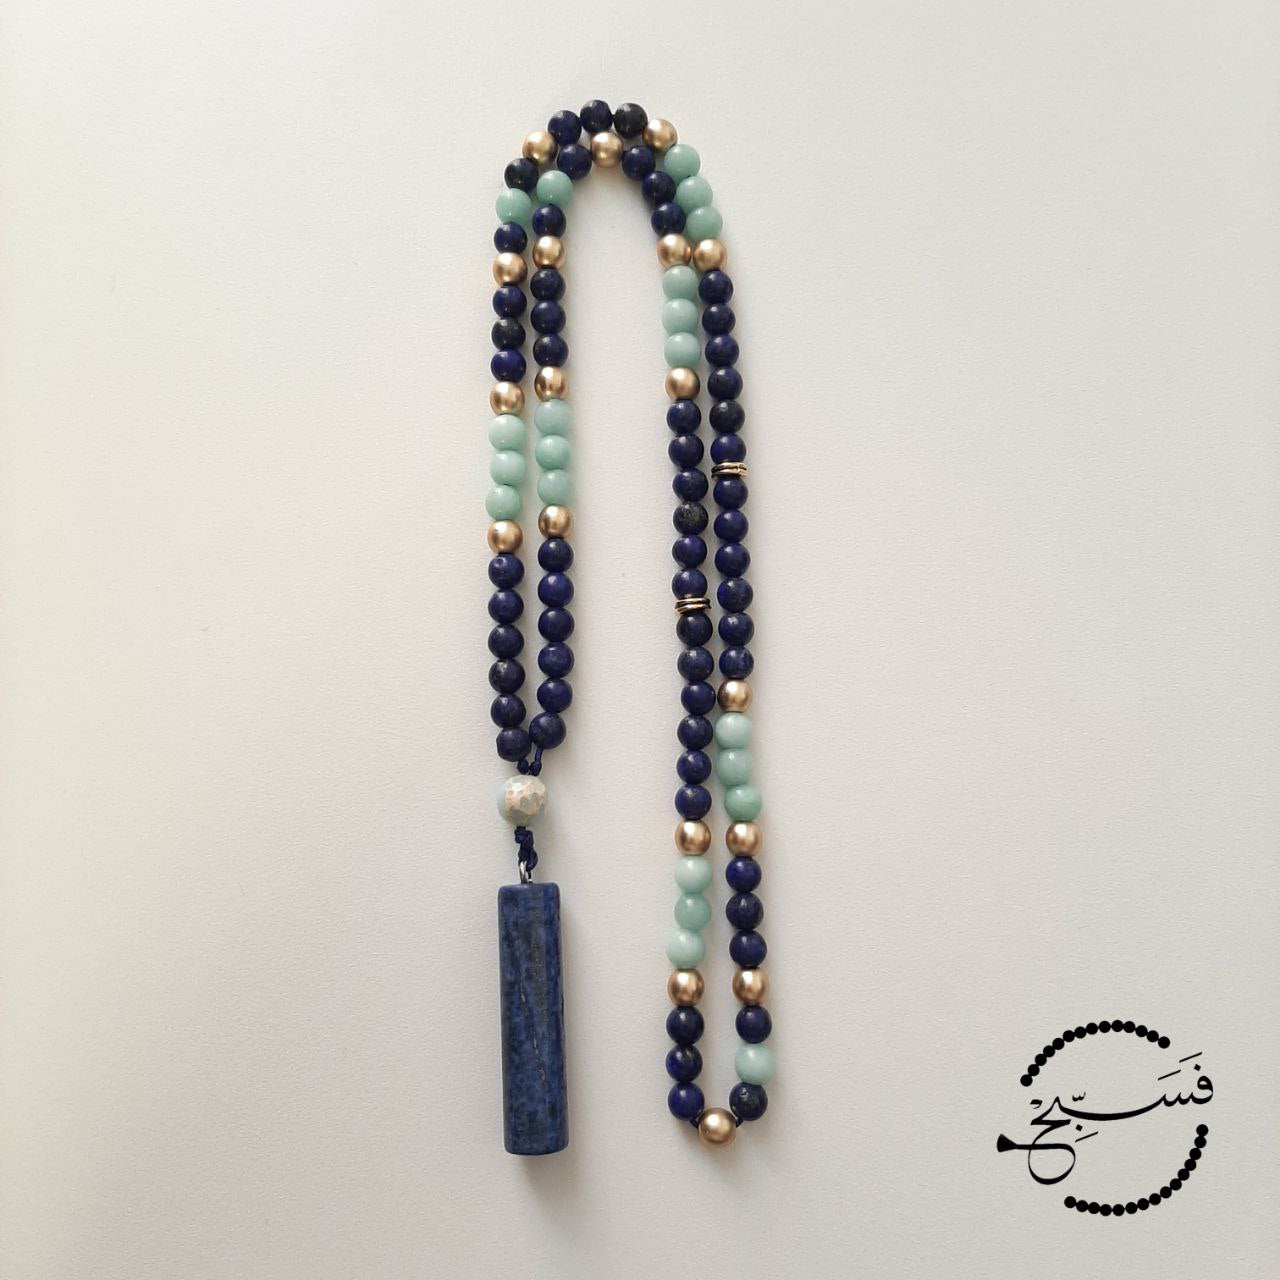 Lapis Lazuli pendant and beads, with amazonite and matte gold beads for a hint of glamour.  Packaged in a luxurious pouch and a gift box.  99 beads